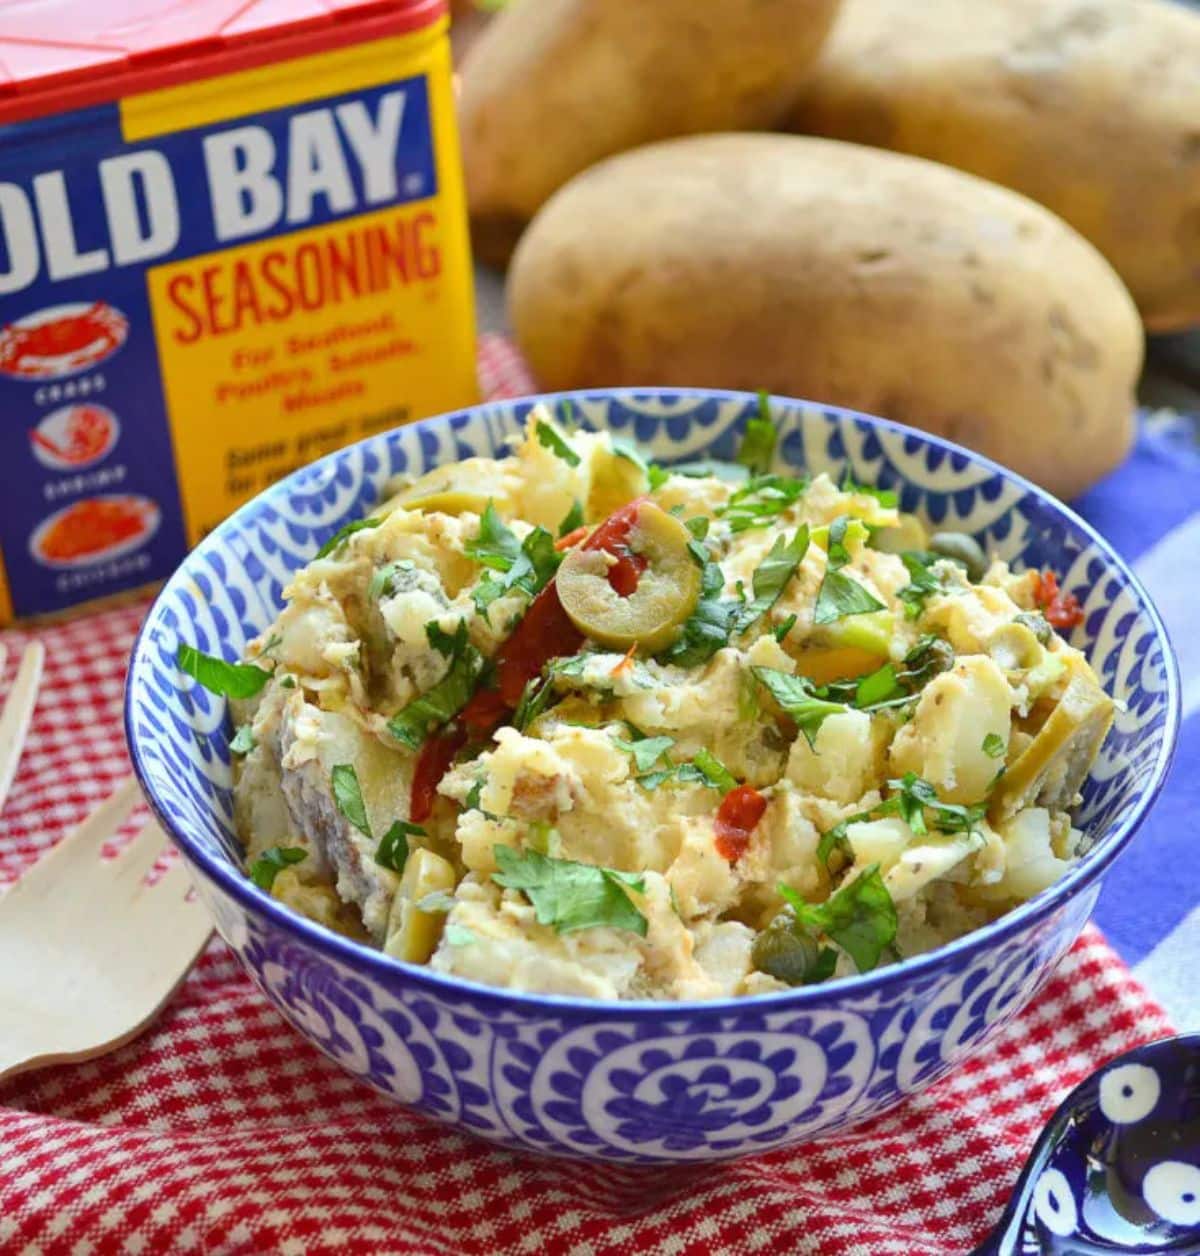 Healthy old bay potato salad in a blue bowl.